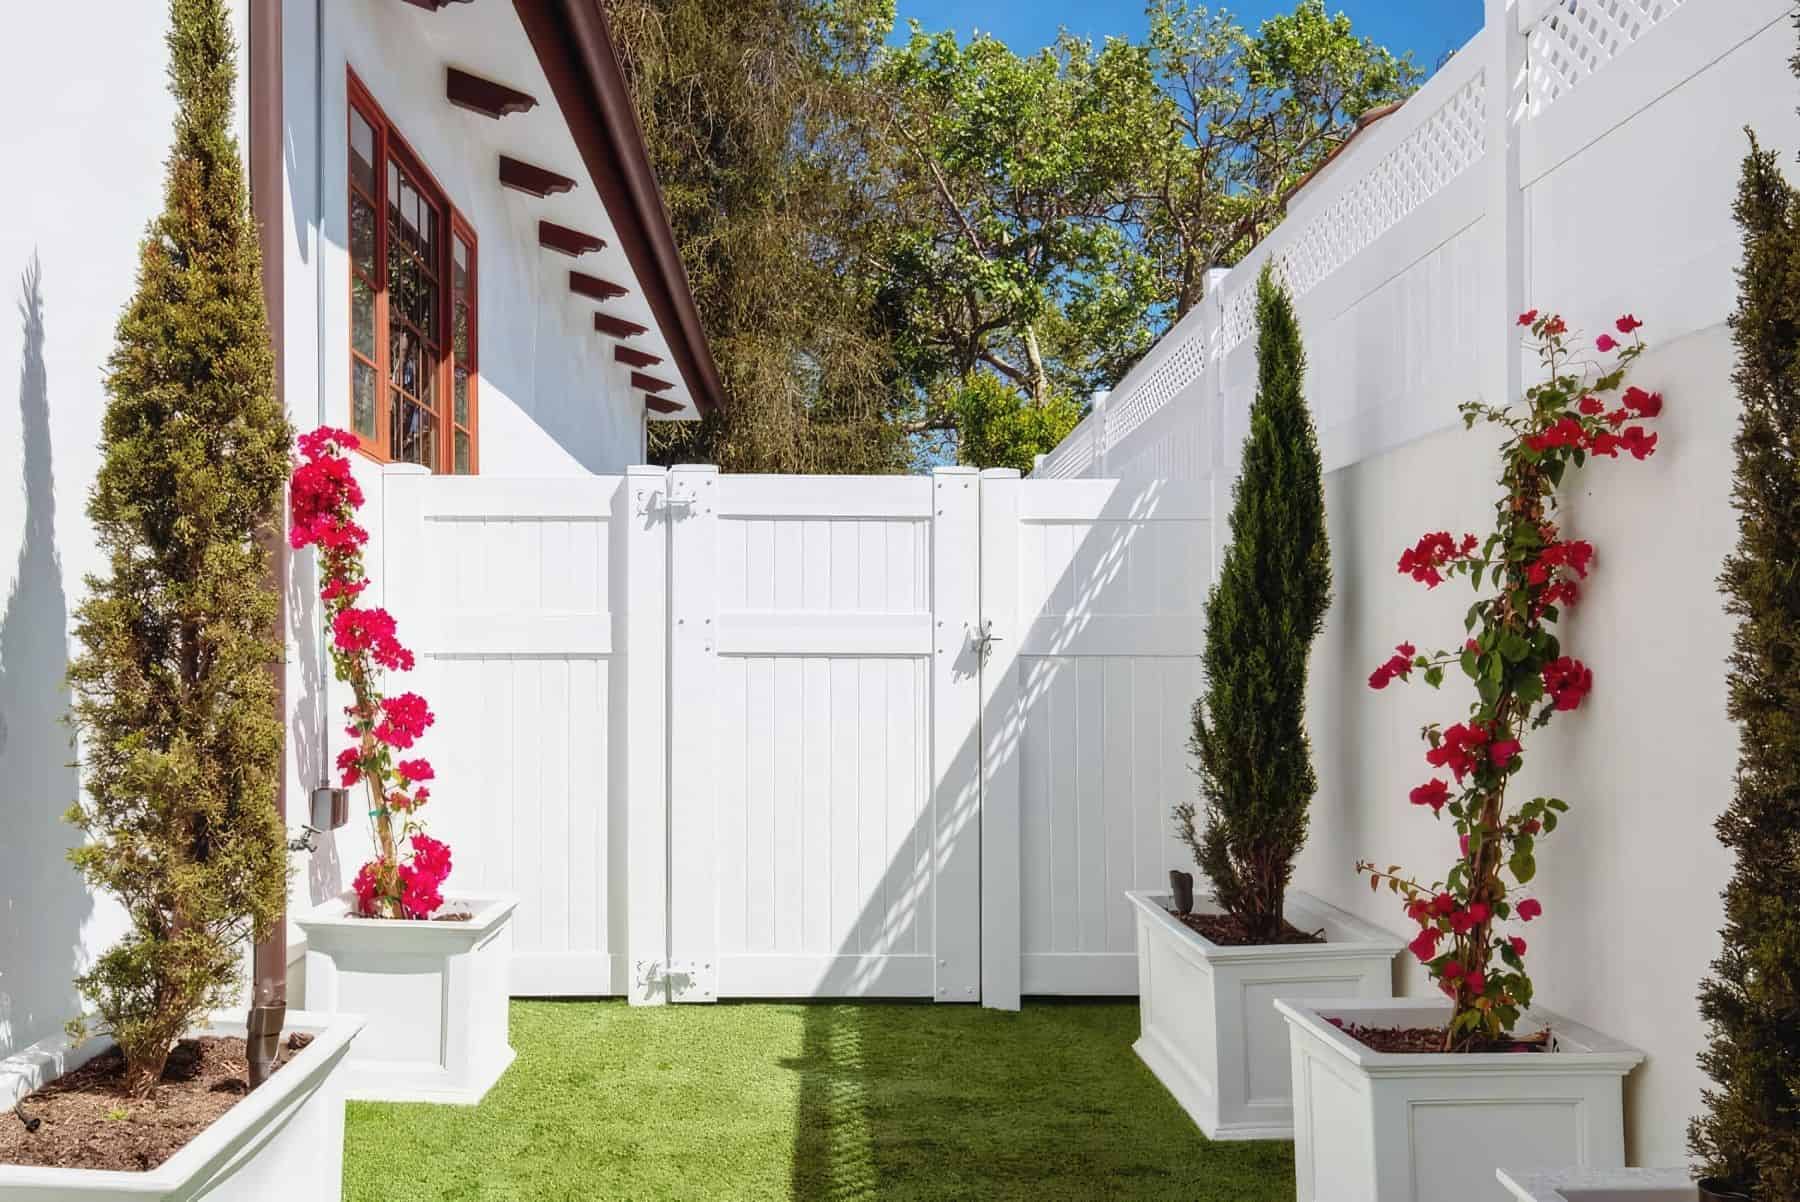 Flowers and shrubs leading up to plain white vinyl single side gate entrance leading from the front lawn to the backyard